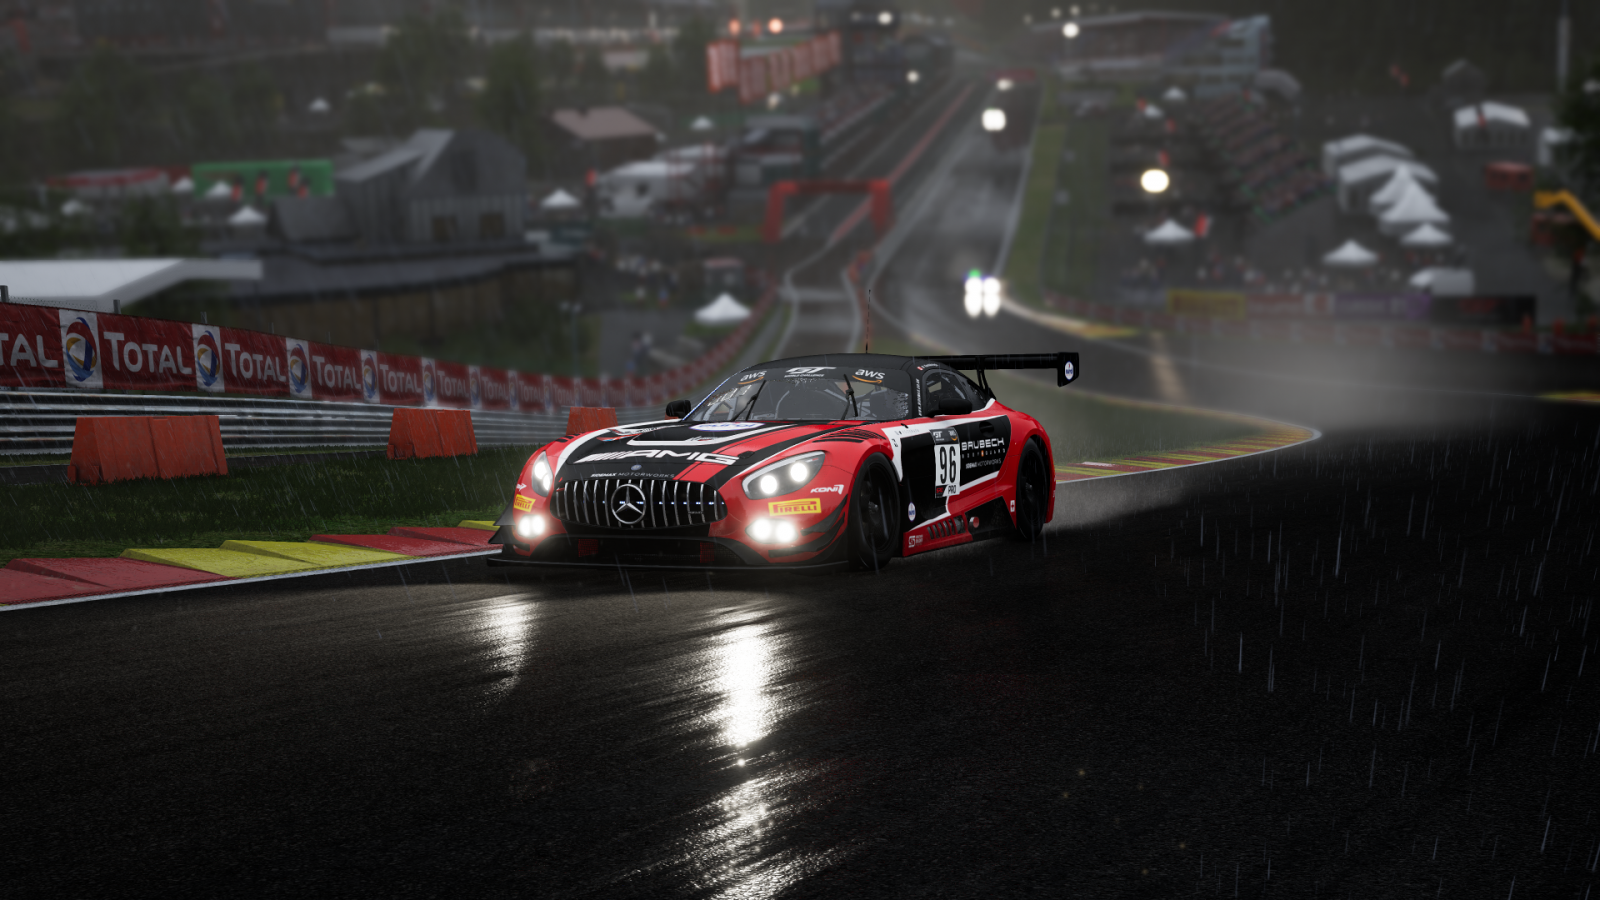 SideMax Motorworks, Mercedes-AMG Take Victory in Rain Soaked 6 Hours of Spa 